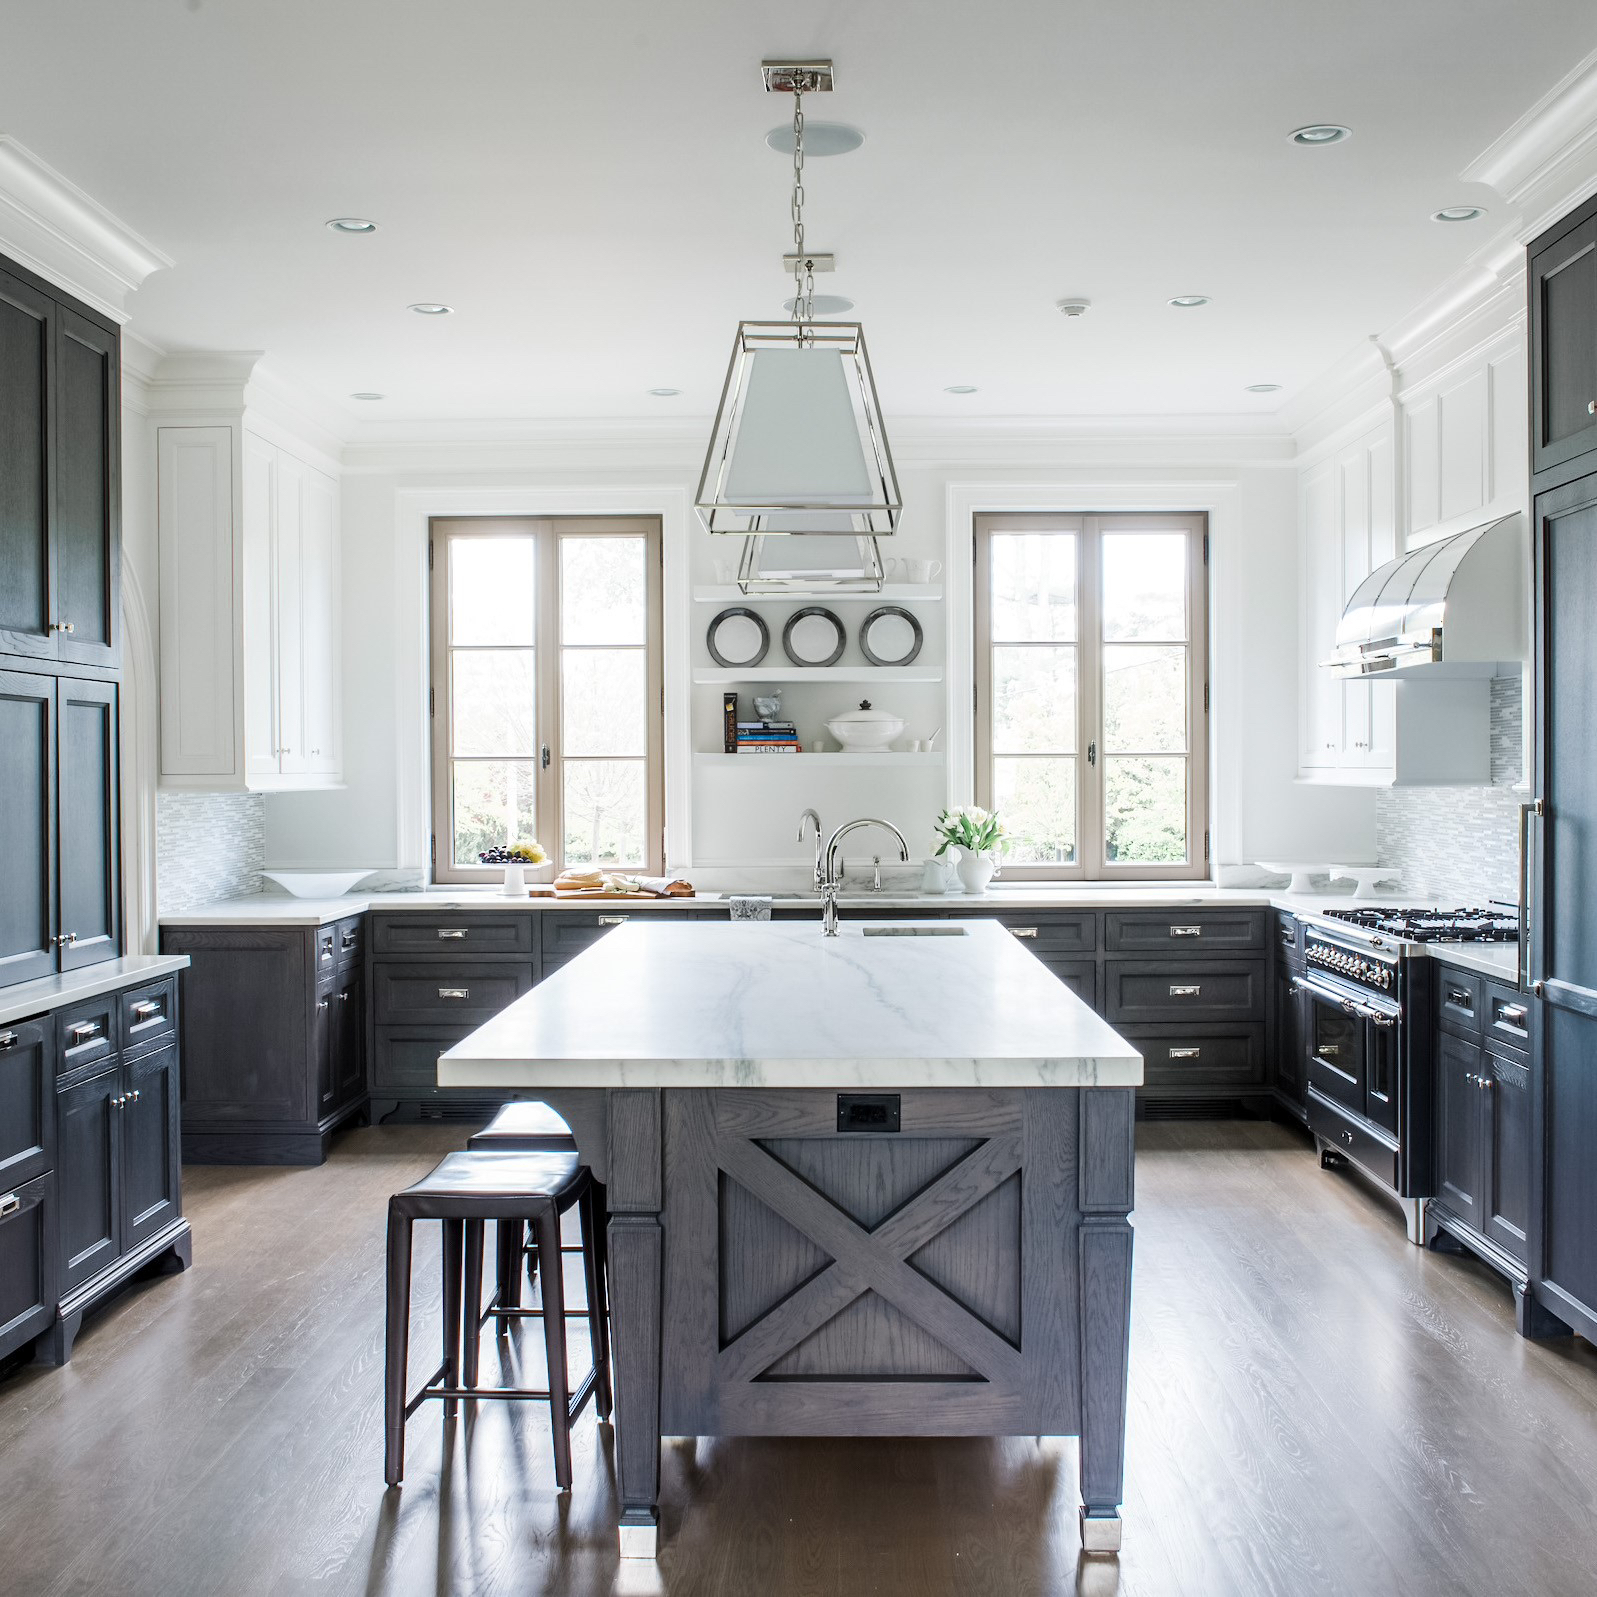 Blue-gray cabinetry in a bright kitchen. Photo by Instagram user @vanderhornarchitects